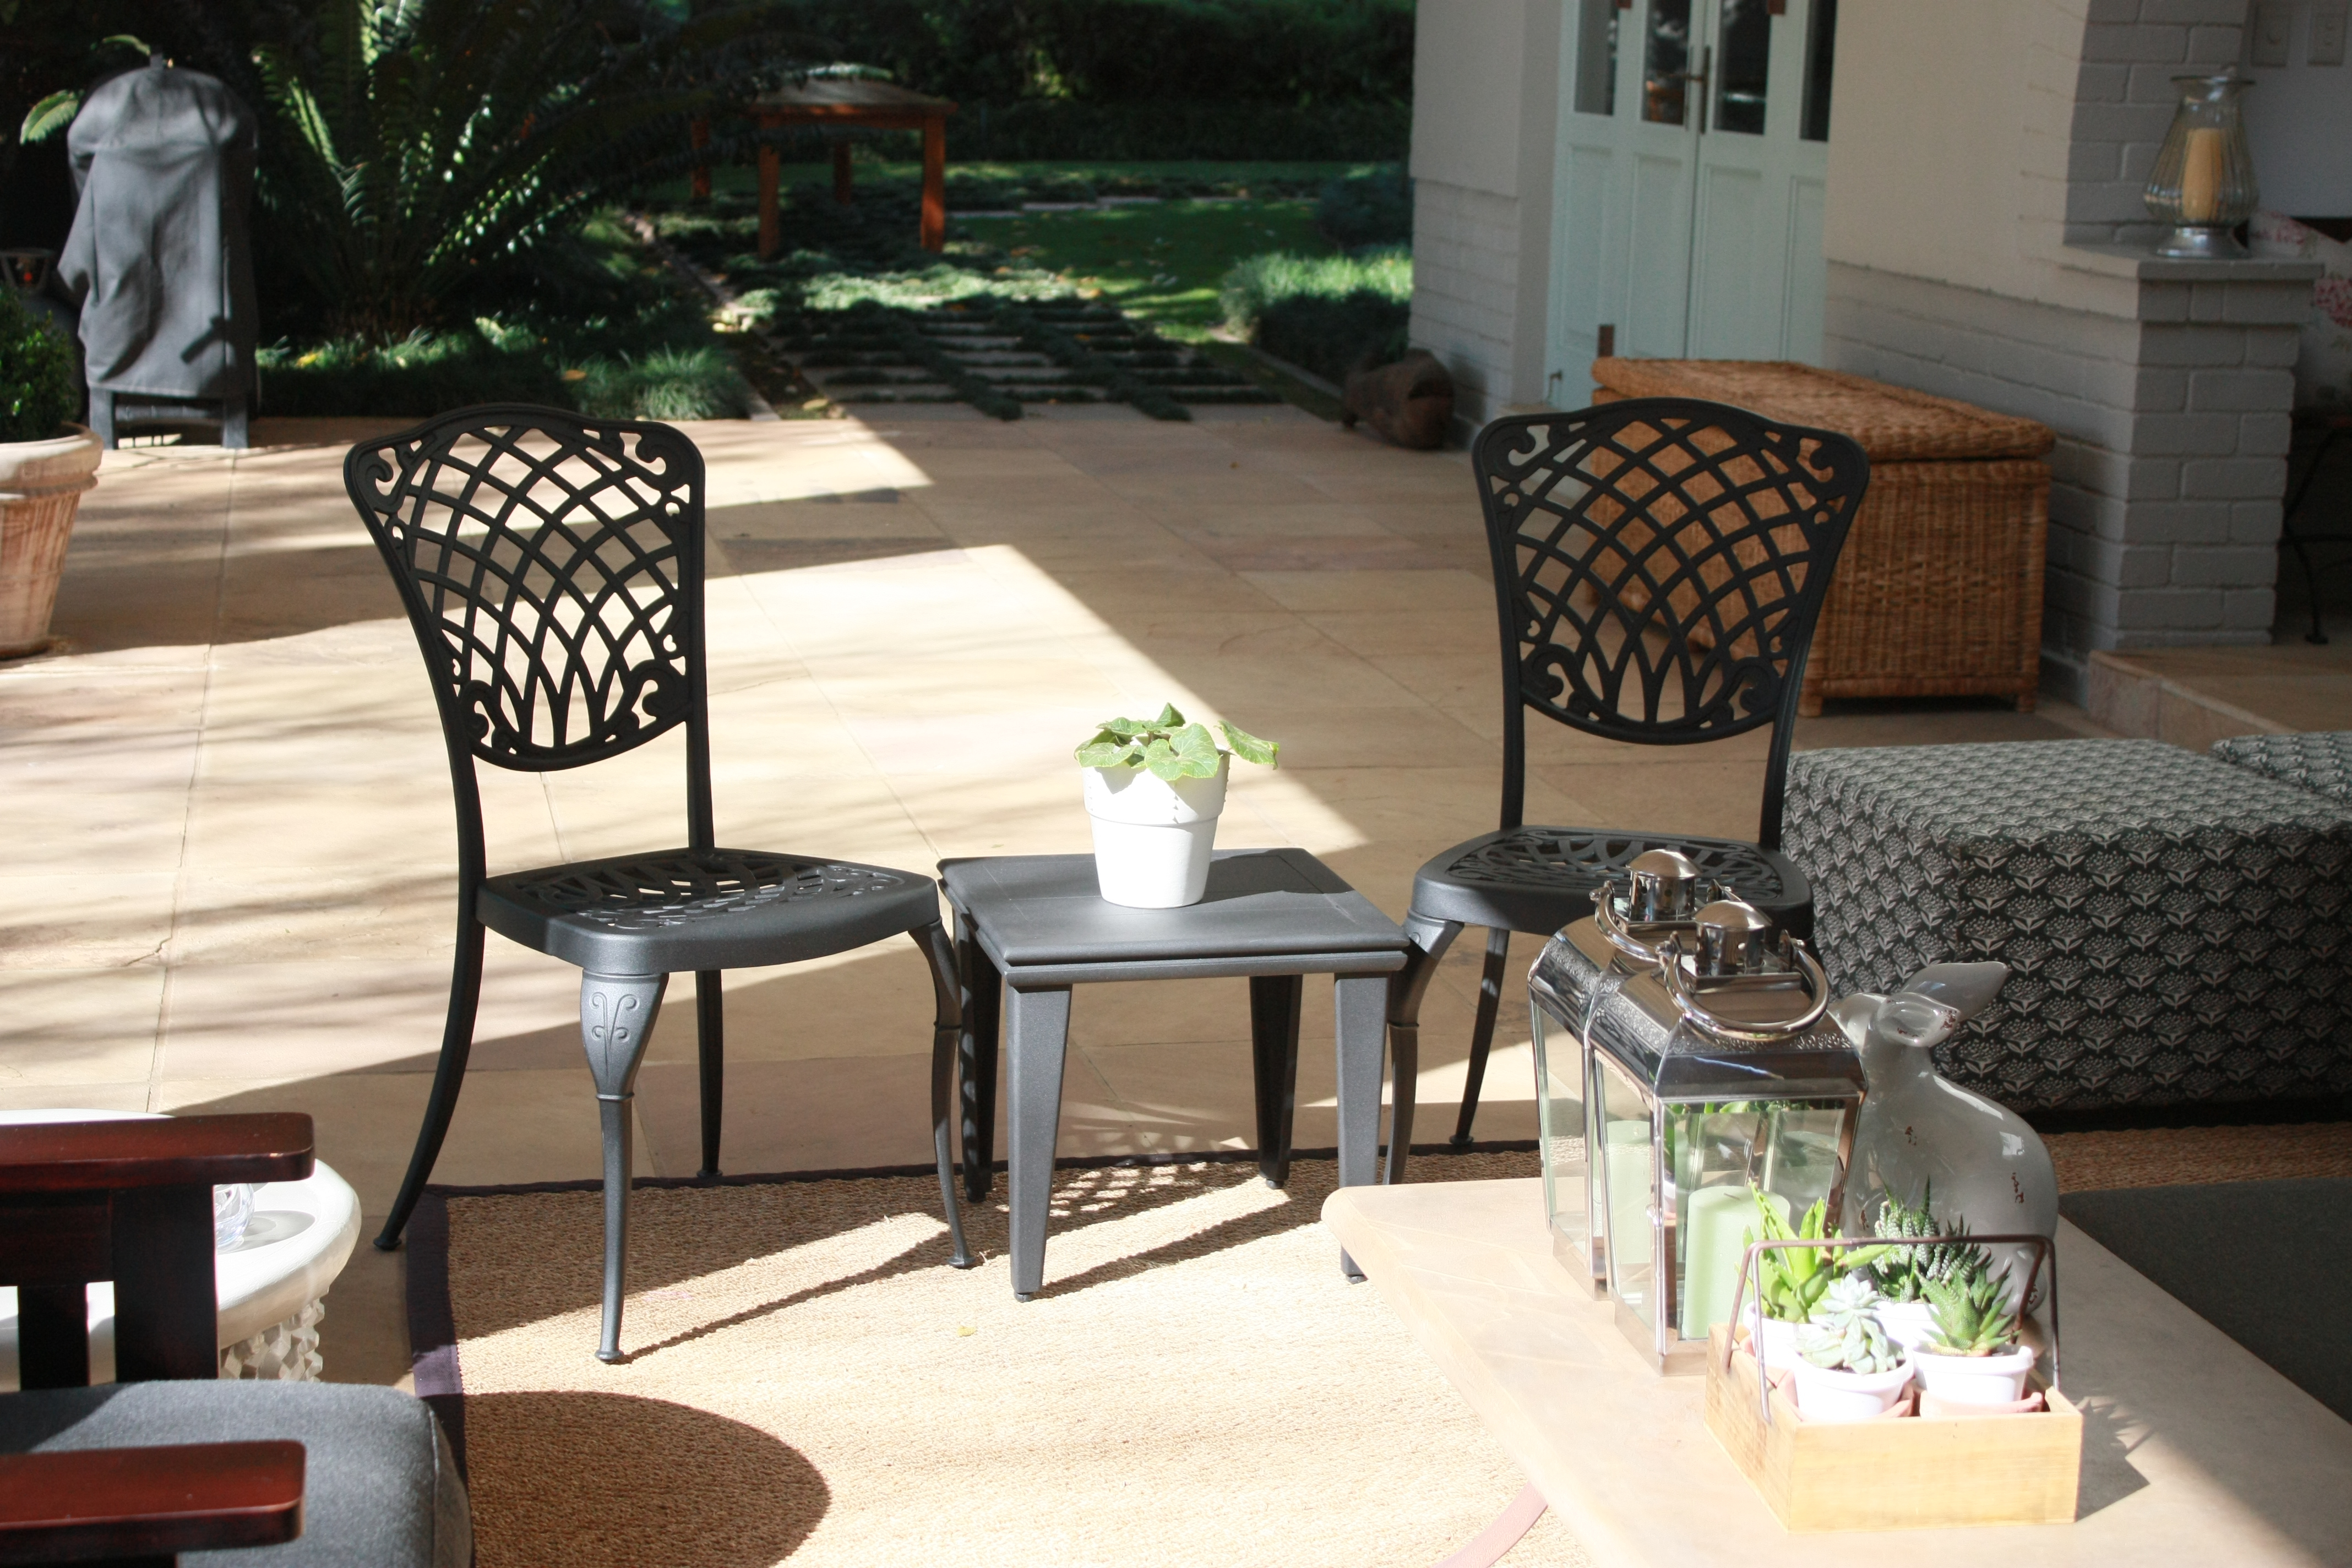 Regent Outdoor Furniture South African Manufacturer Of within dimensions 4272 X 2848